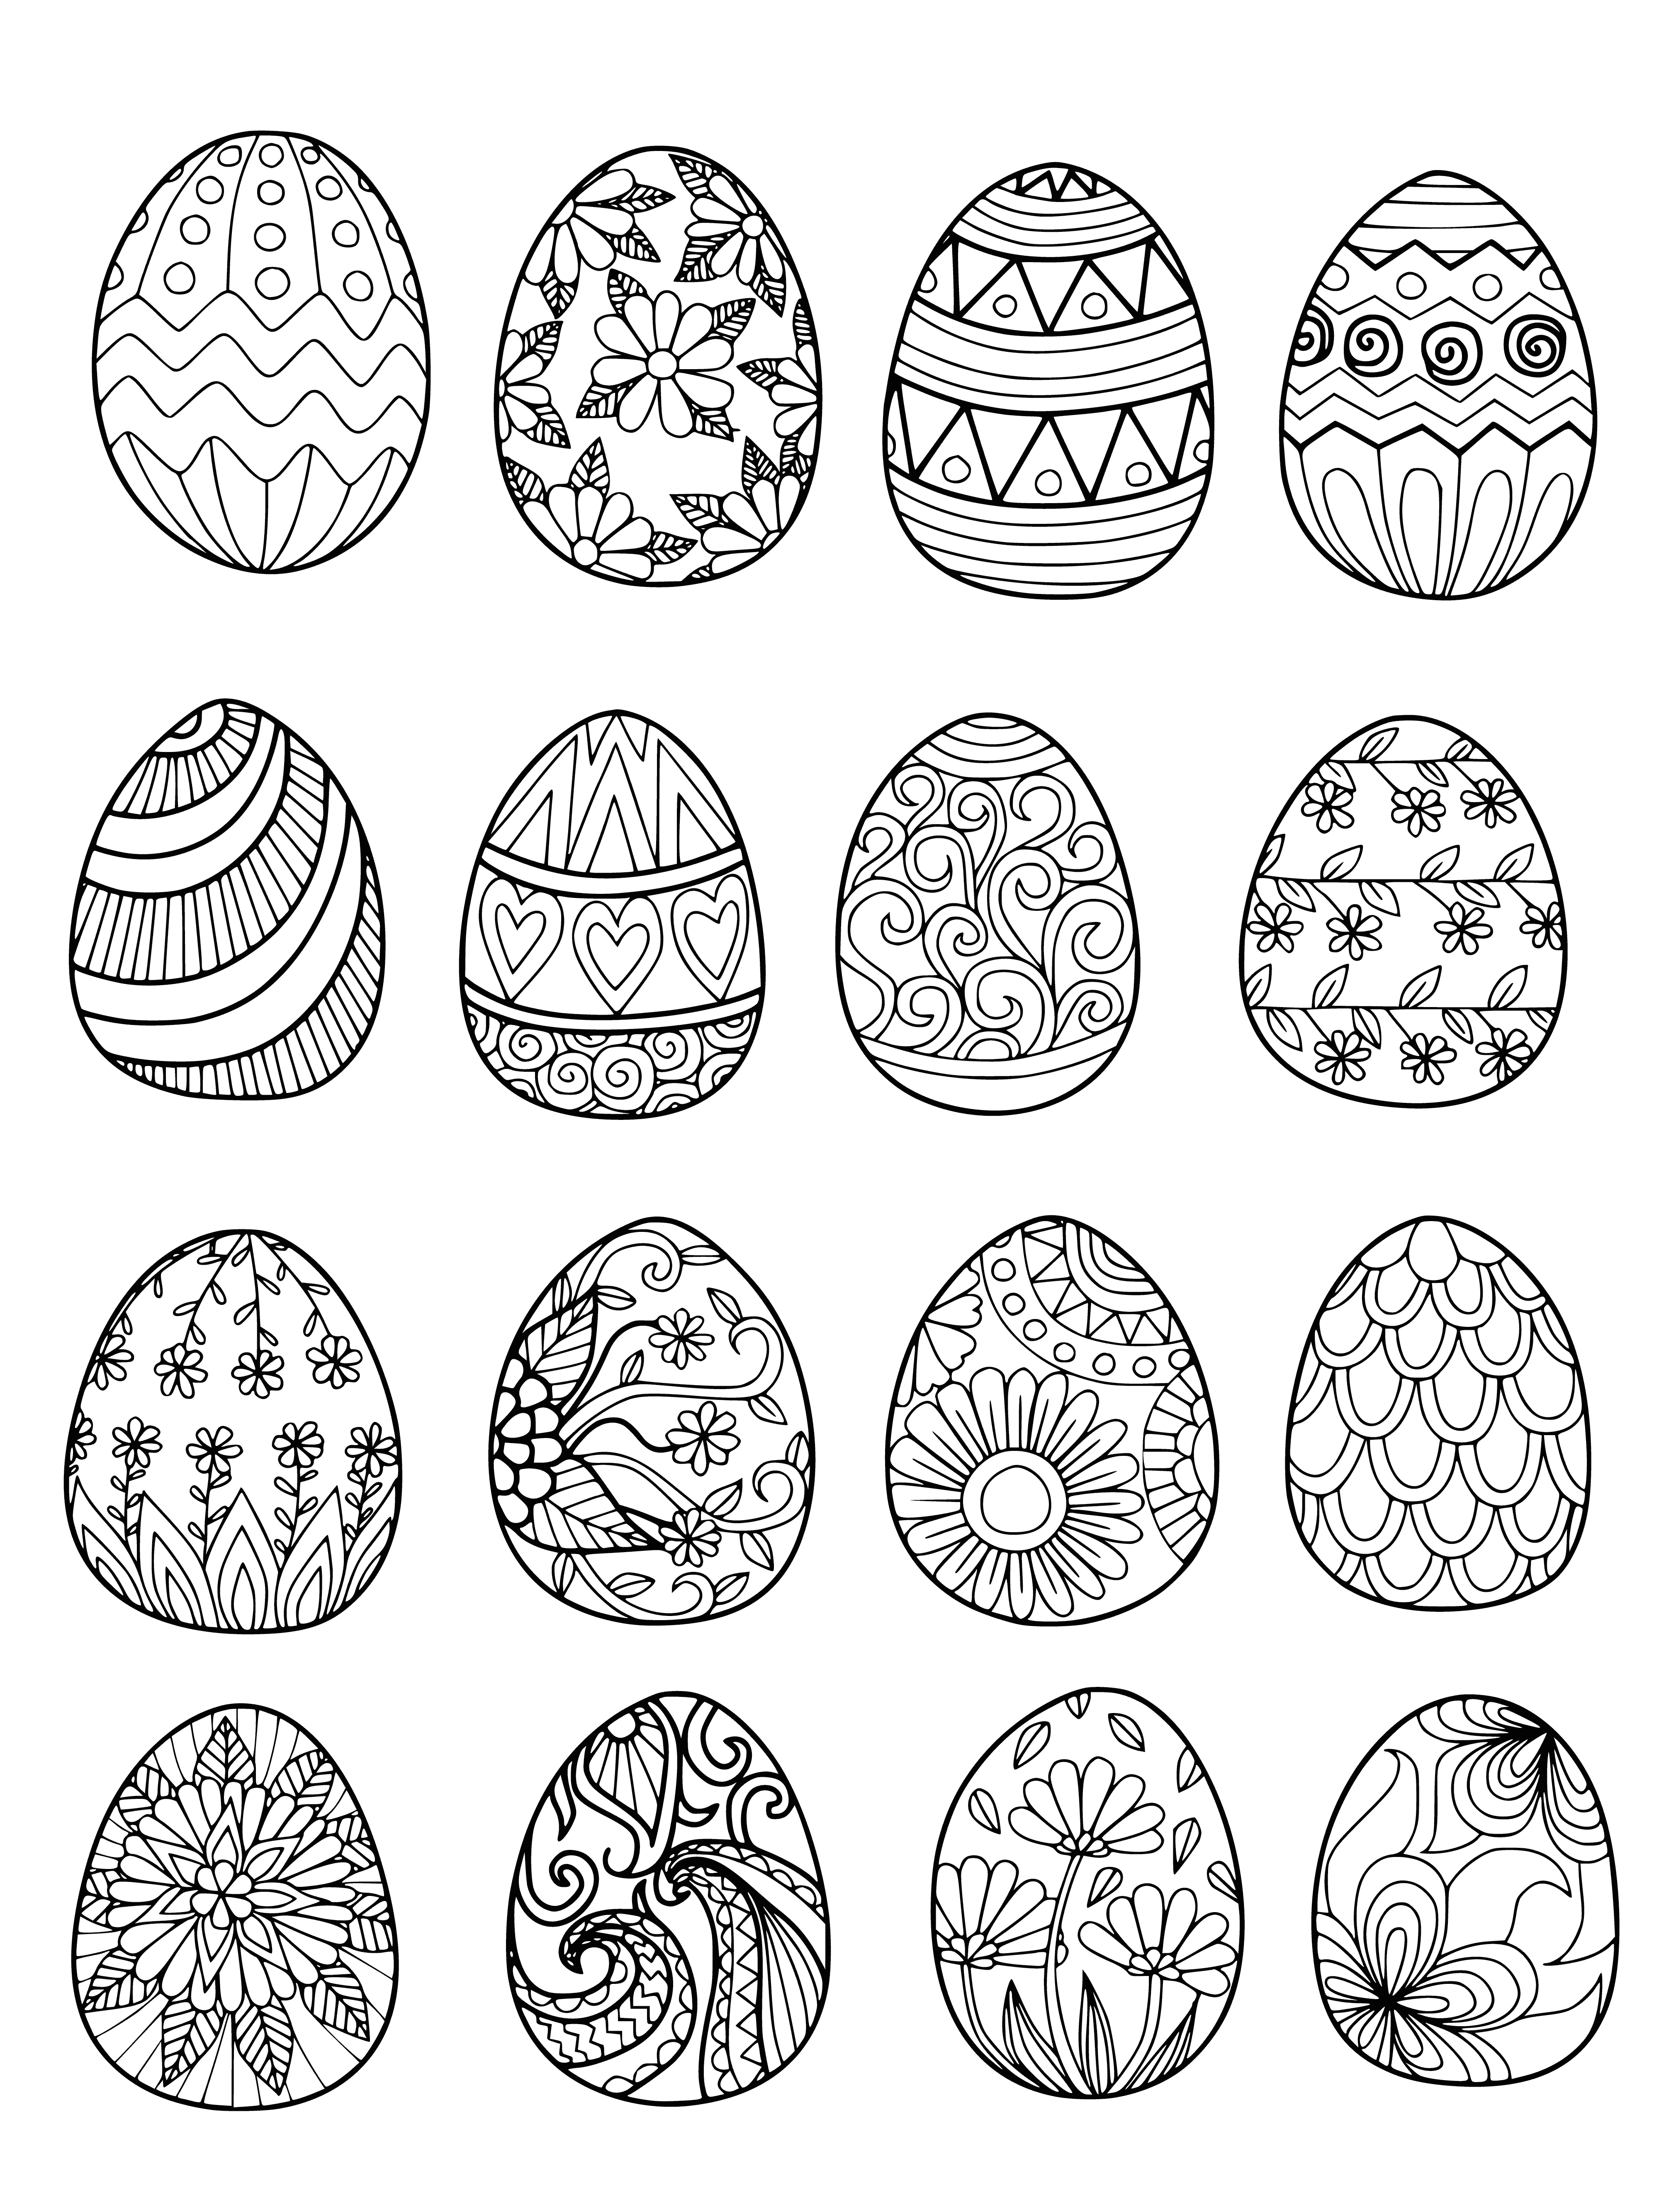 coloring page: Two Easter eggs w/spots, one blue, one yellow. Sitting side-by-side. Perfect coloring page activity!